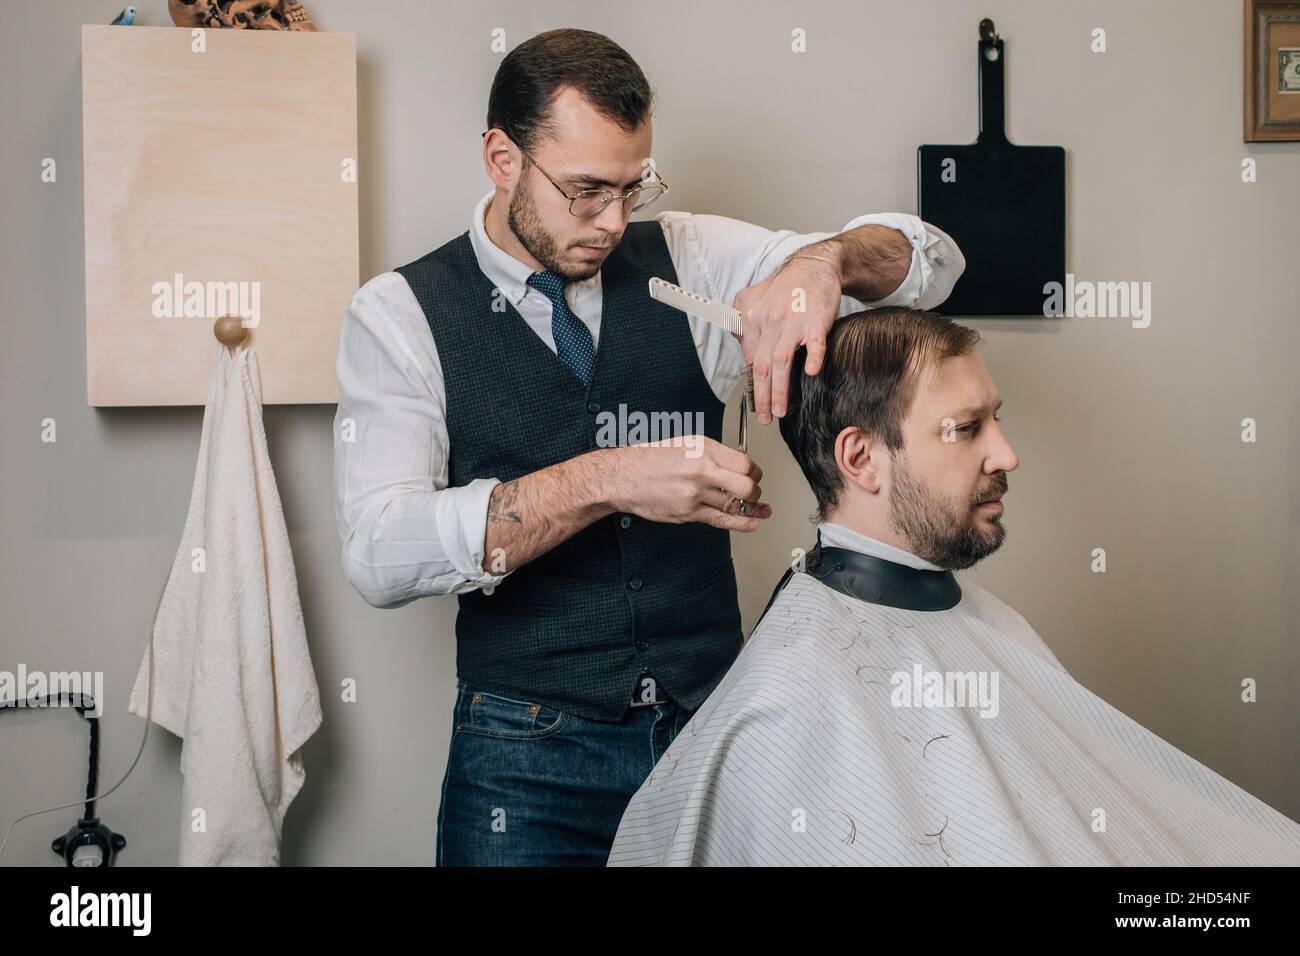 Hairdresser cuts hair on his head with scissors. Stock Photo